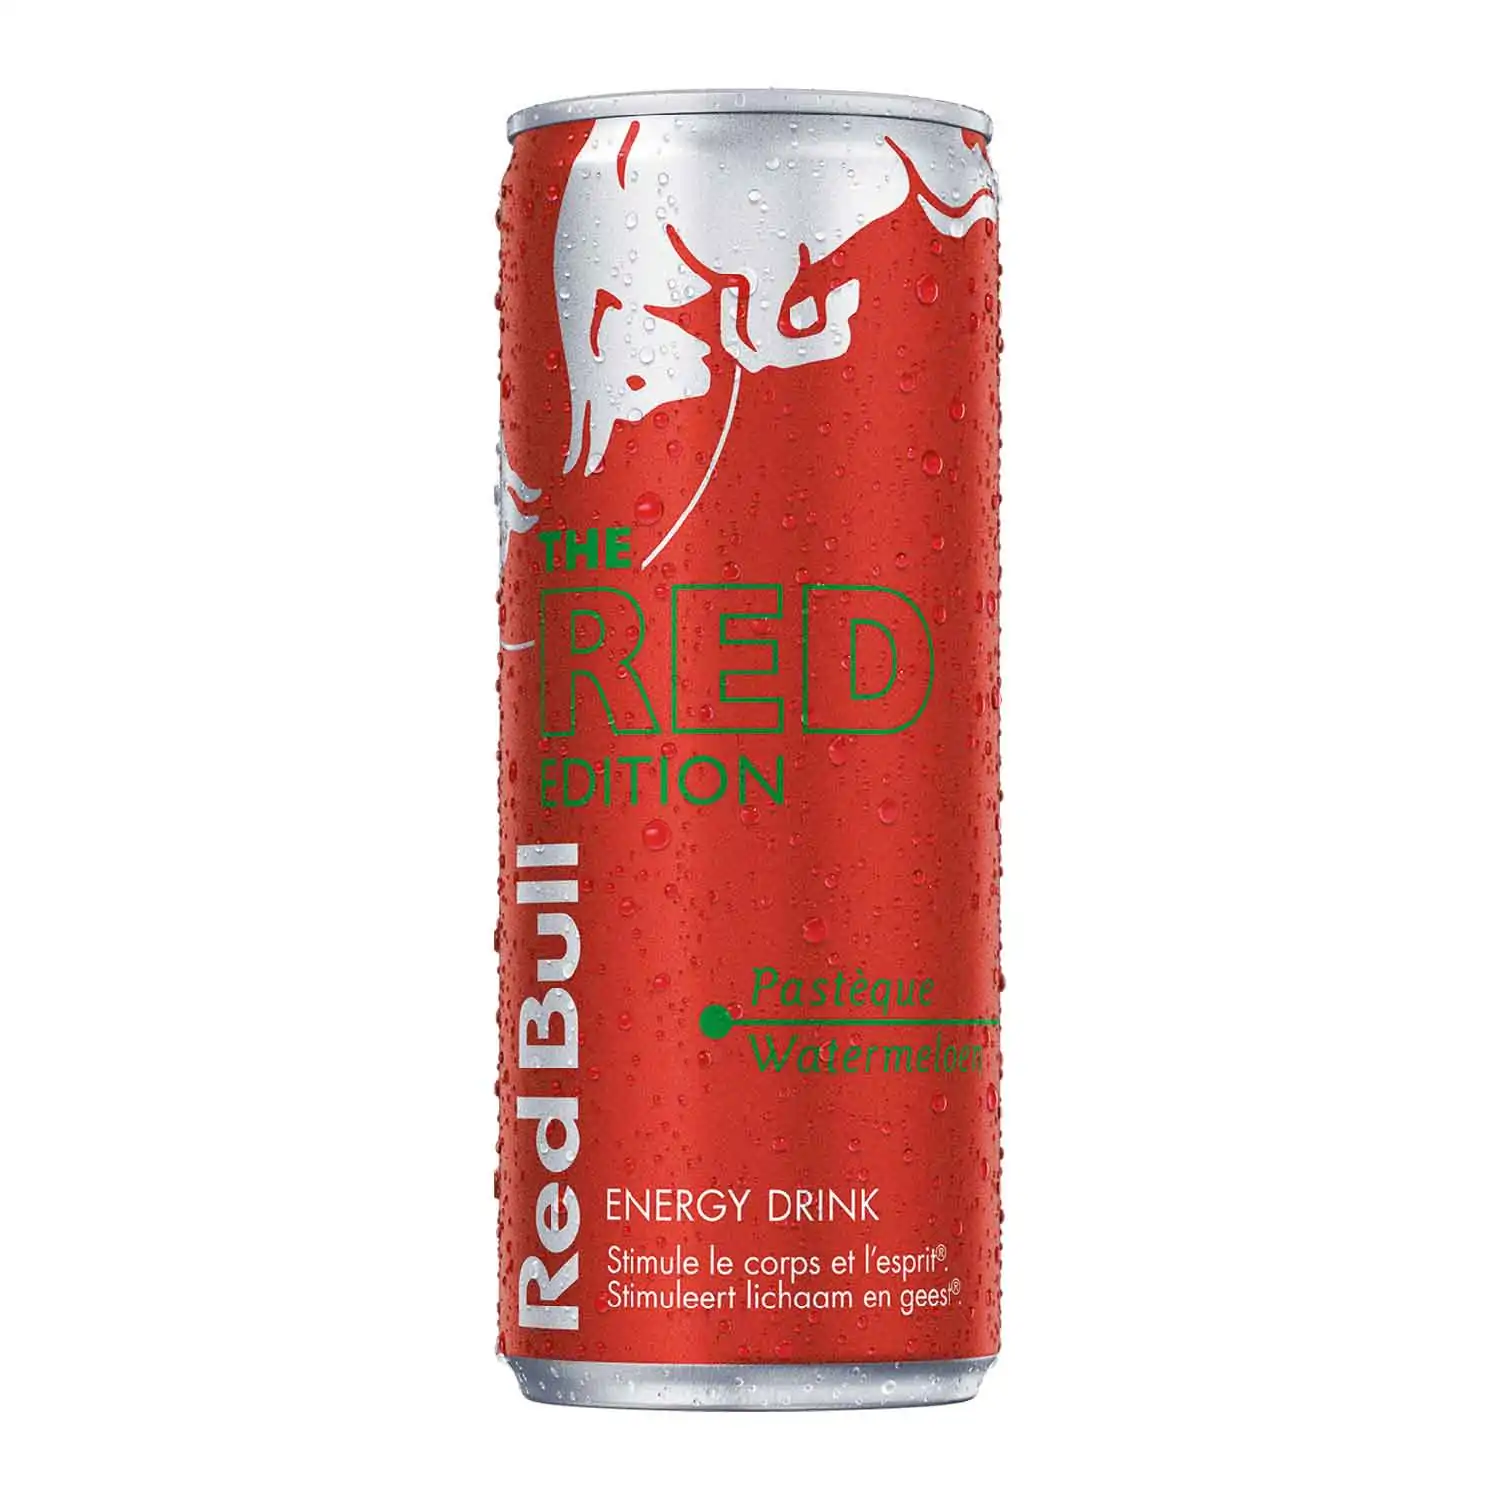 Red Bull red edition watermelon 25cl - Buy at Real Tobacco